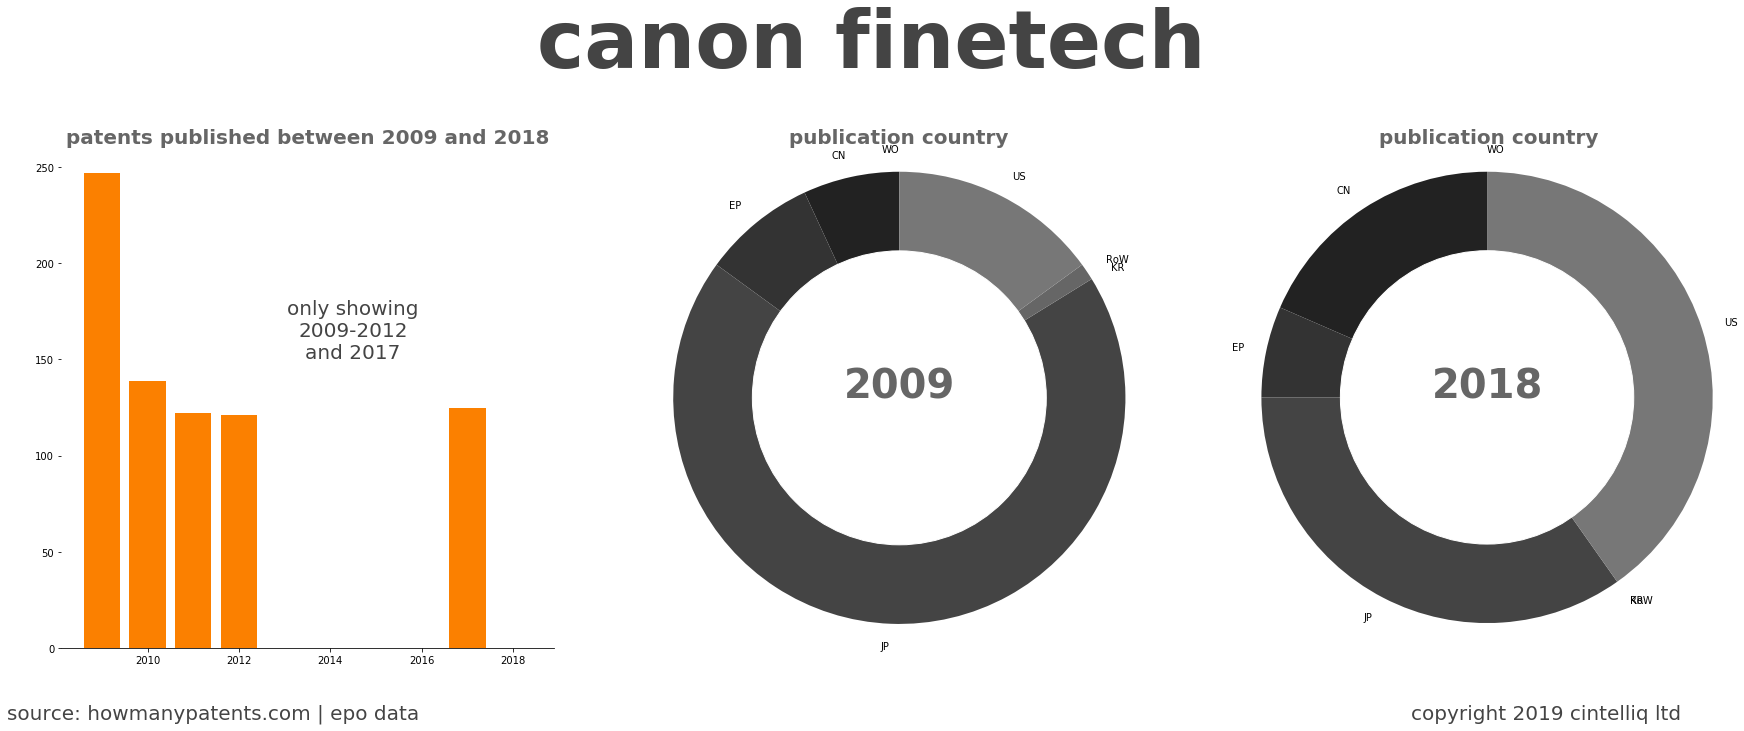 summary of patents for Canon Finetech